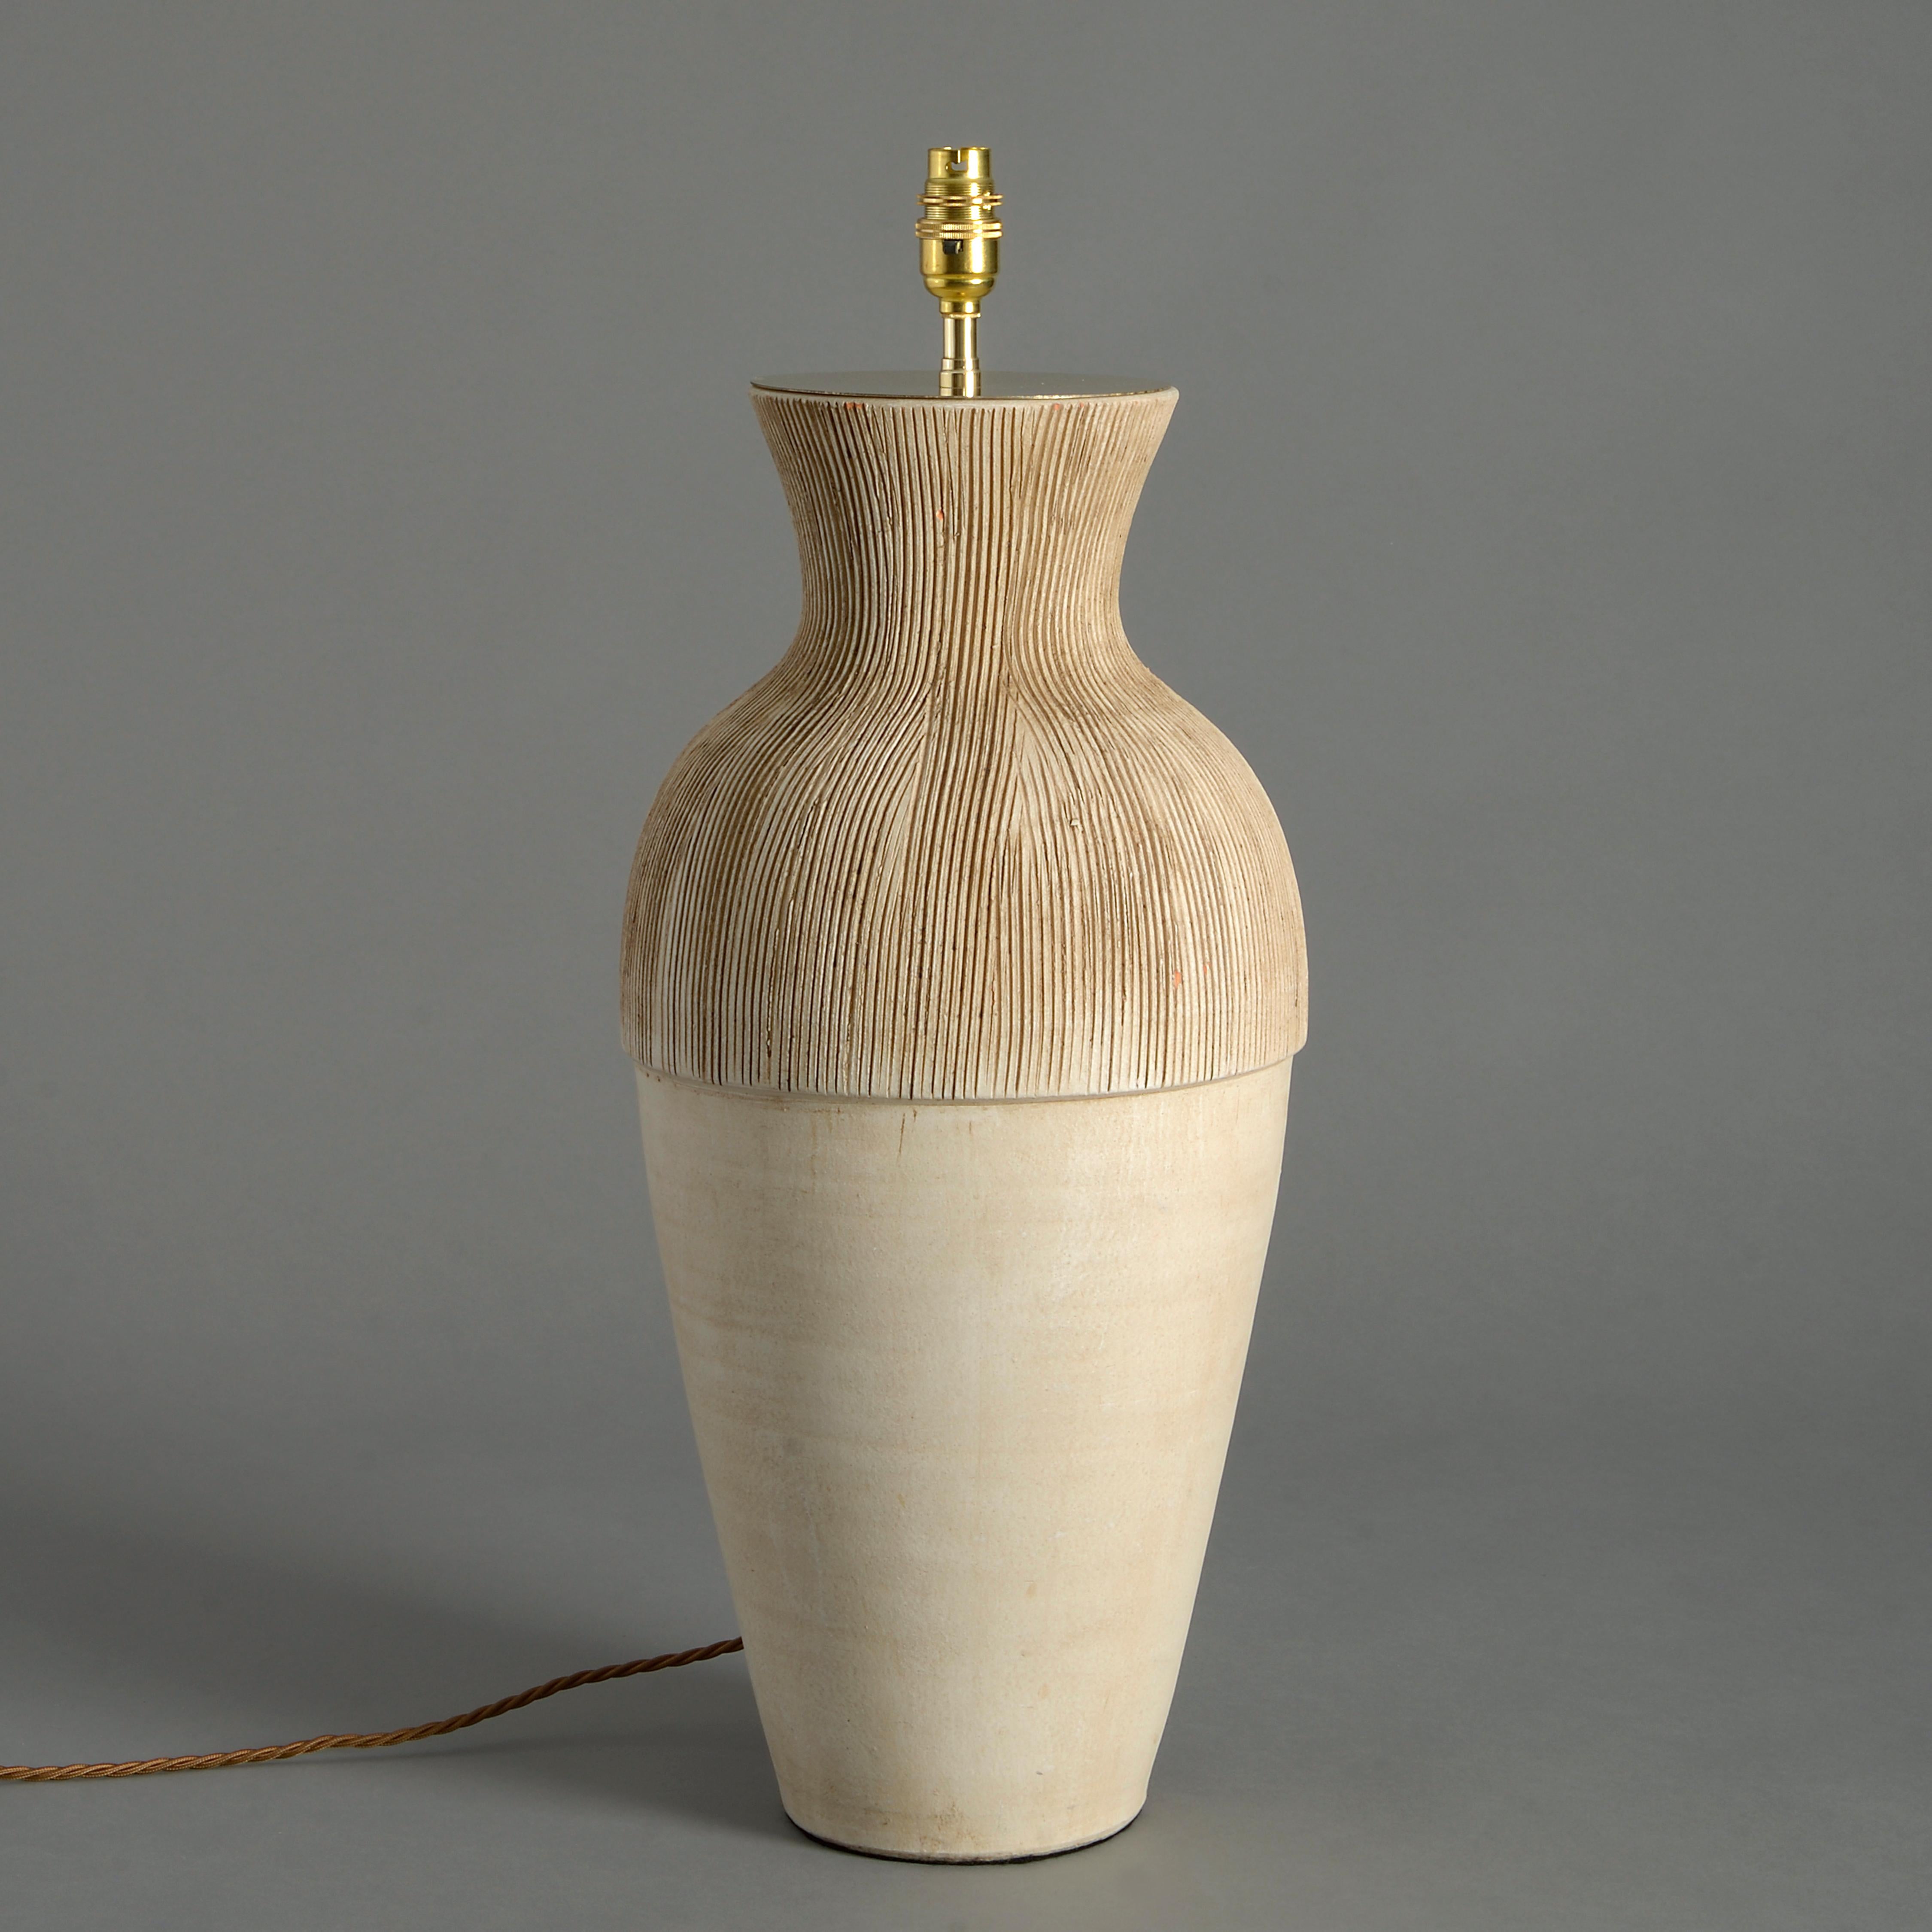 A tall studio pottery ceramic vase of generous proportions, now mounted as a lamp base.